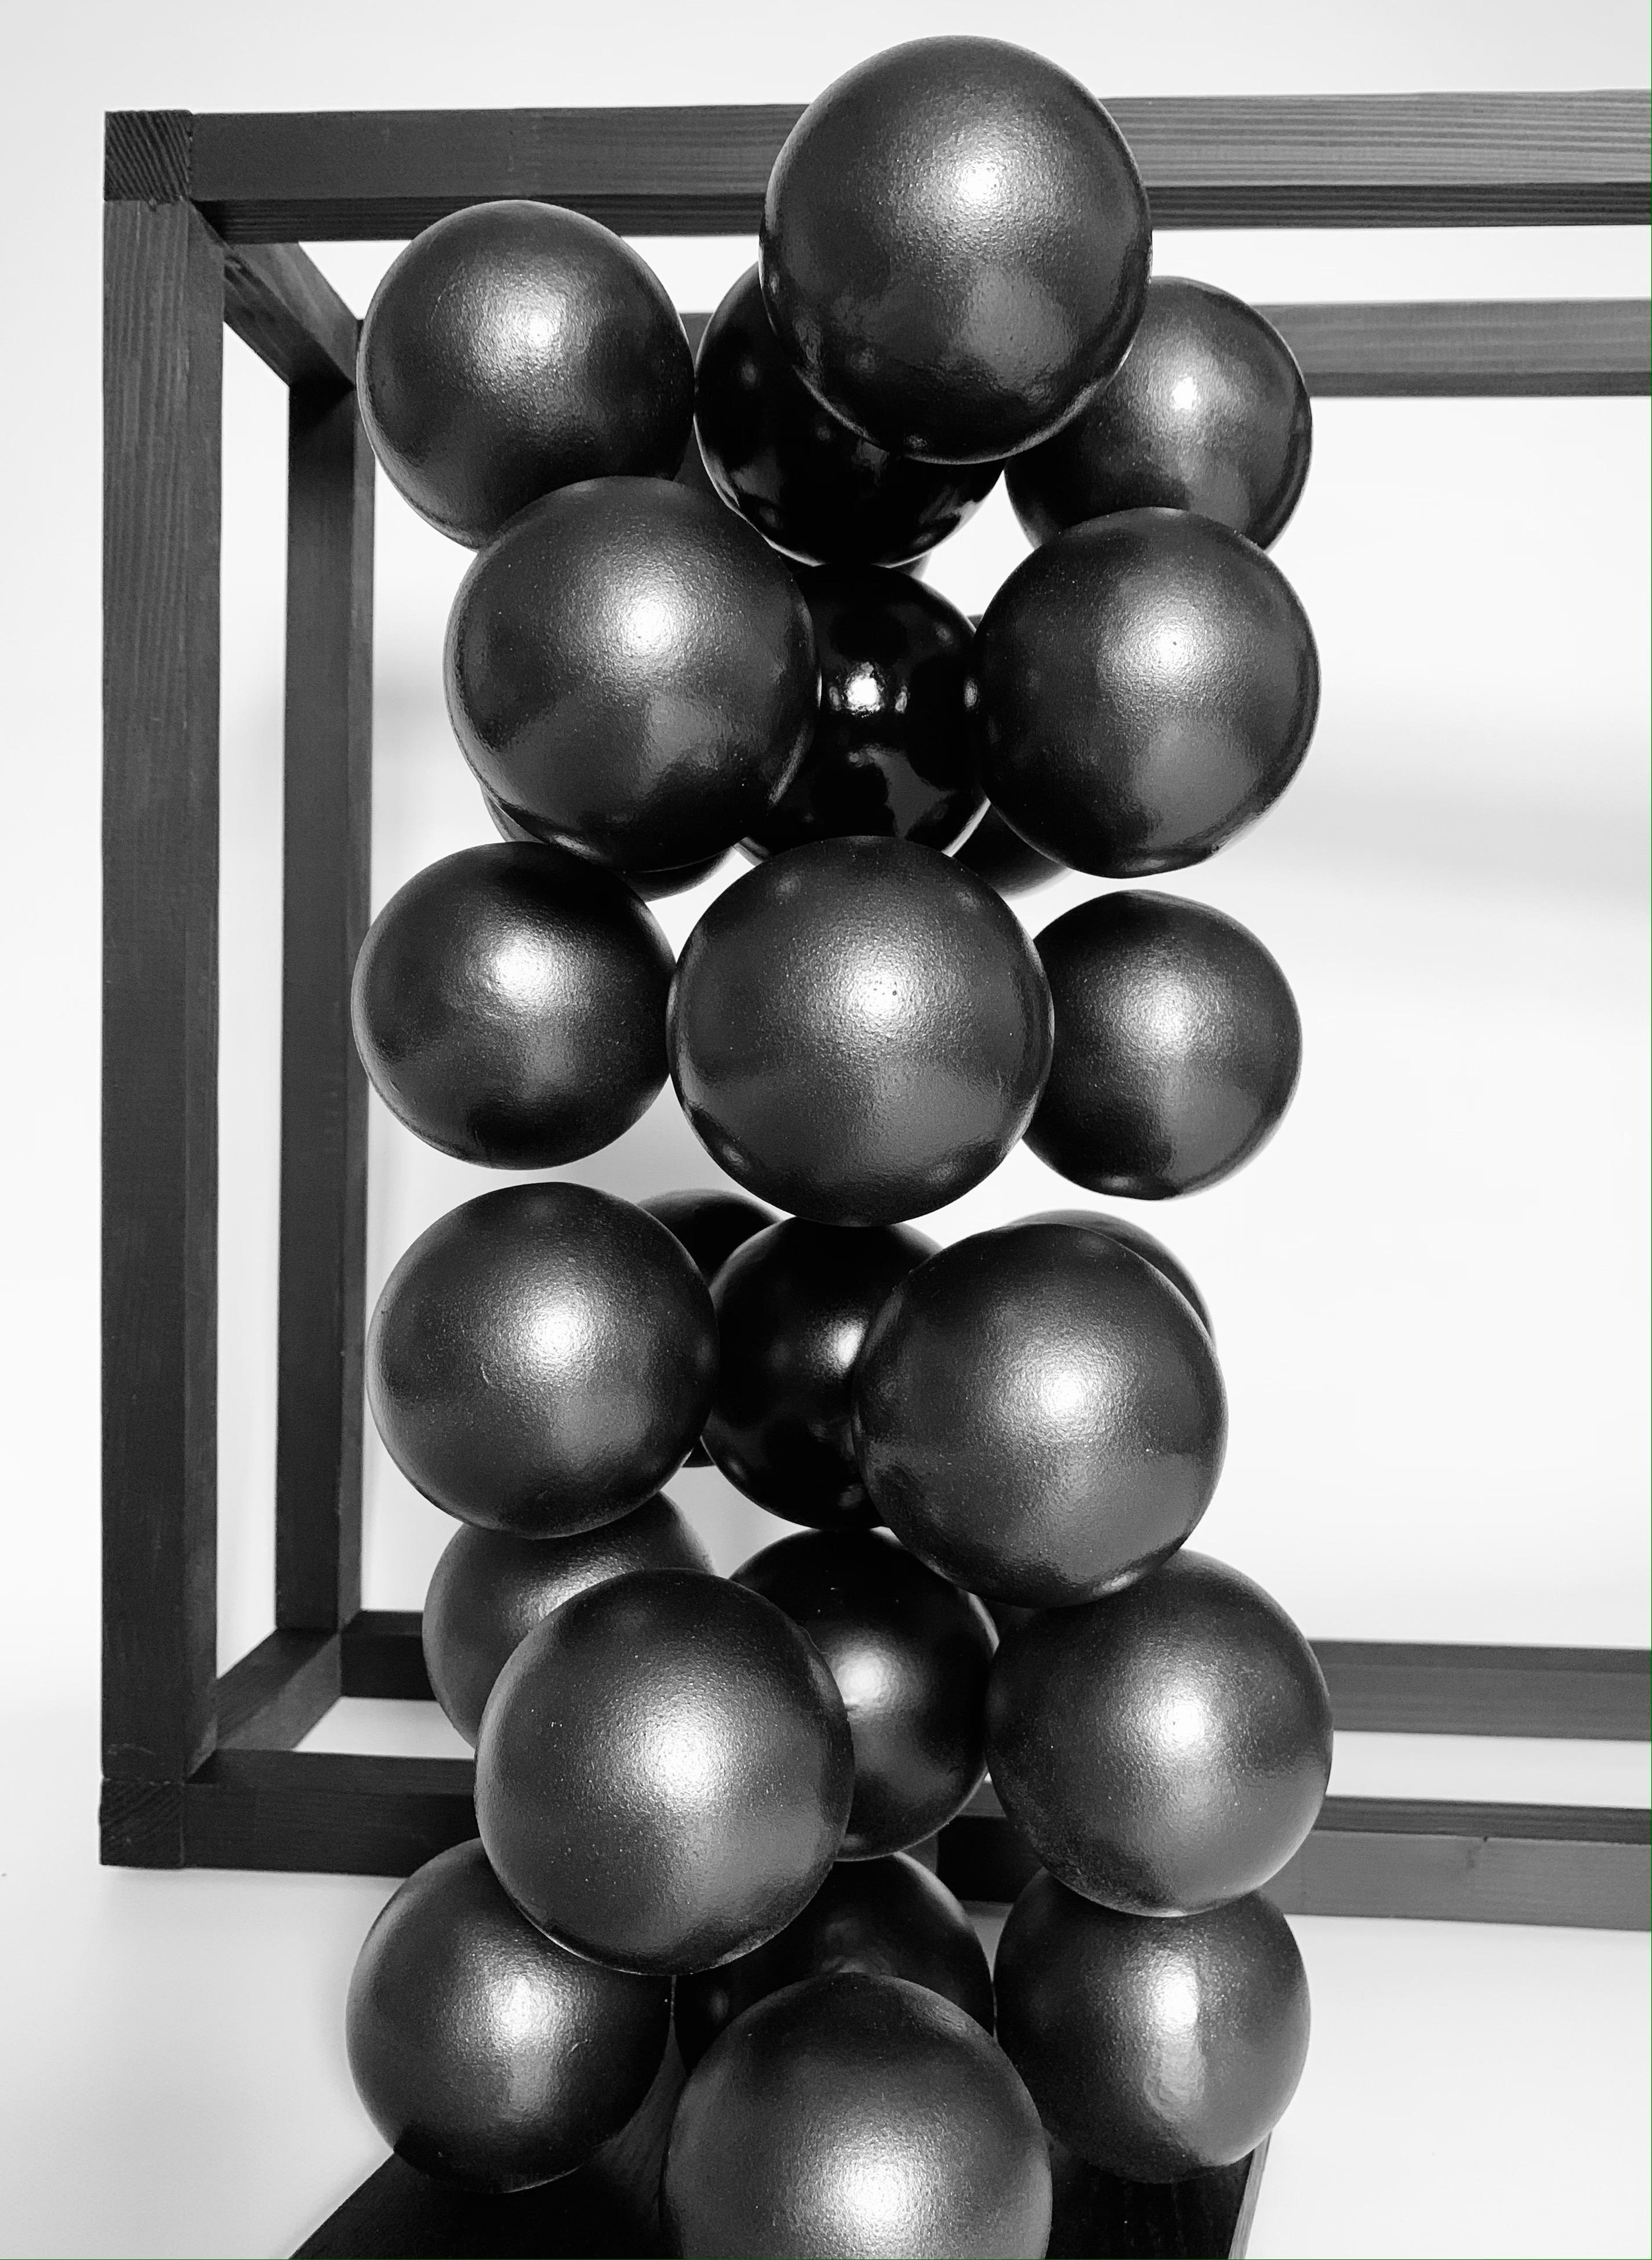 Made in Ukraine, 2020.

Black. Minimalistic. Abstract. Spheres: from molecules to planets. Look around: mono sphere or billions of small combinations of spheres - this all is our world.

Location and delivery from: Made in Ukraine